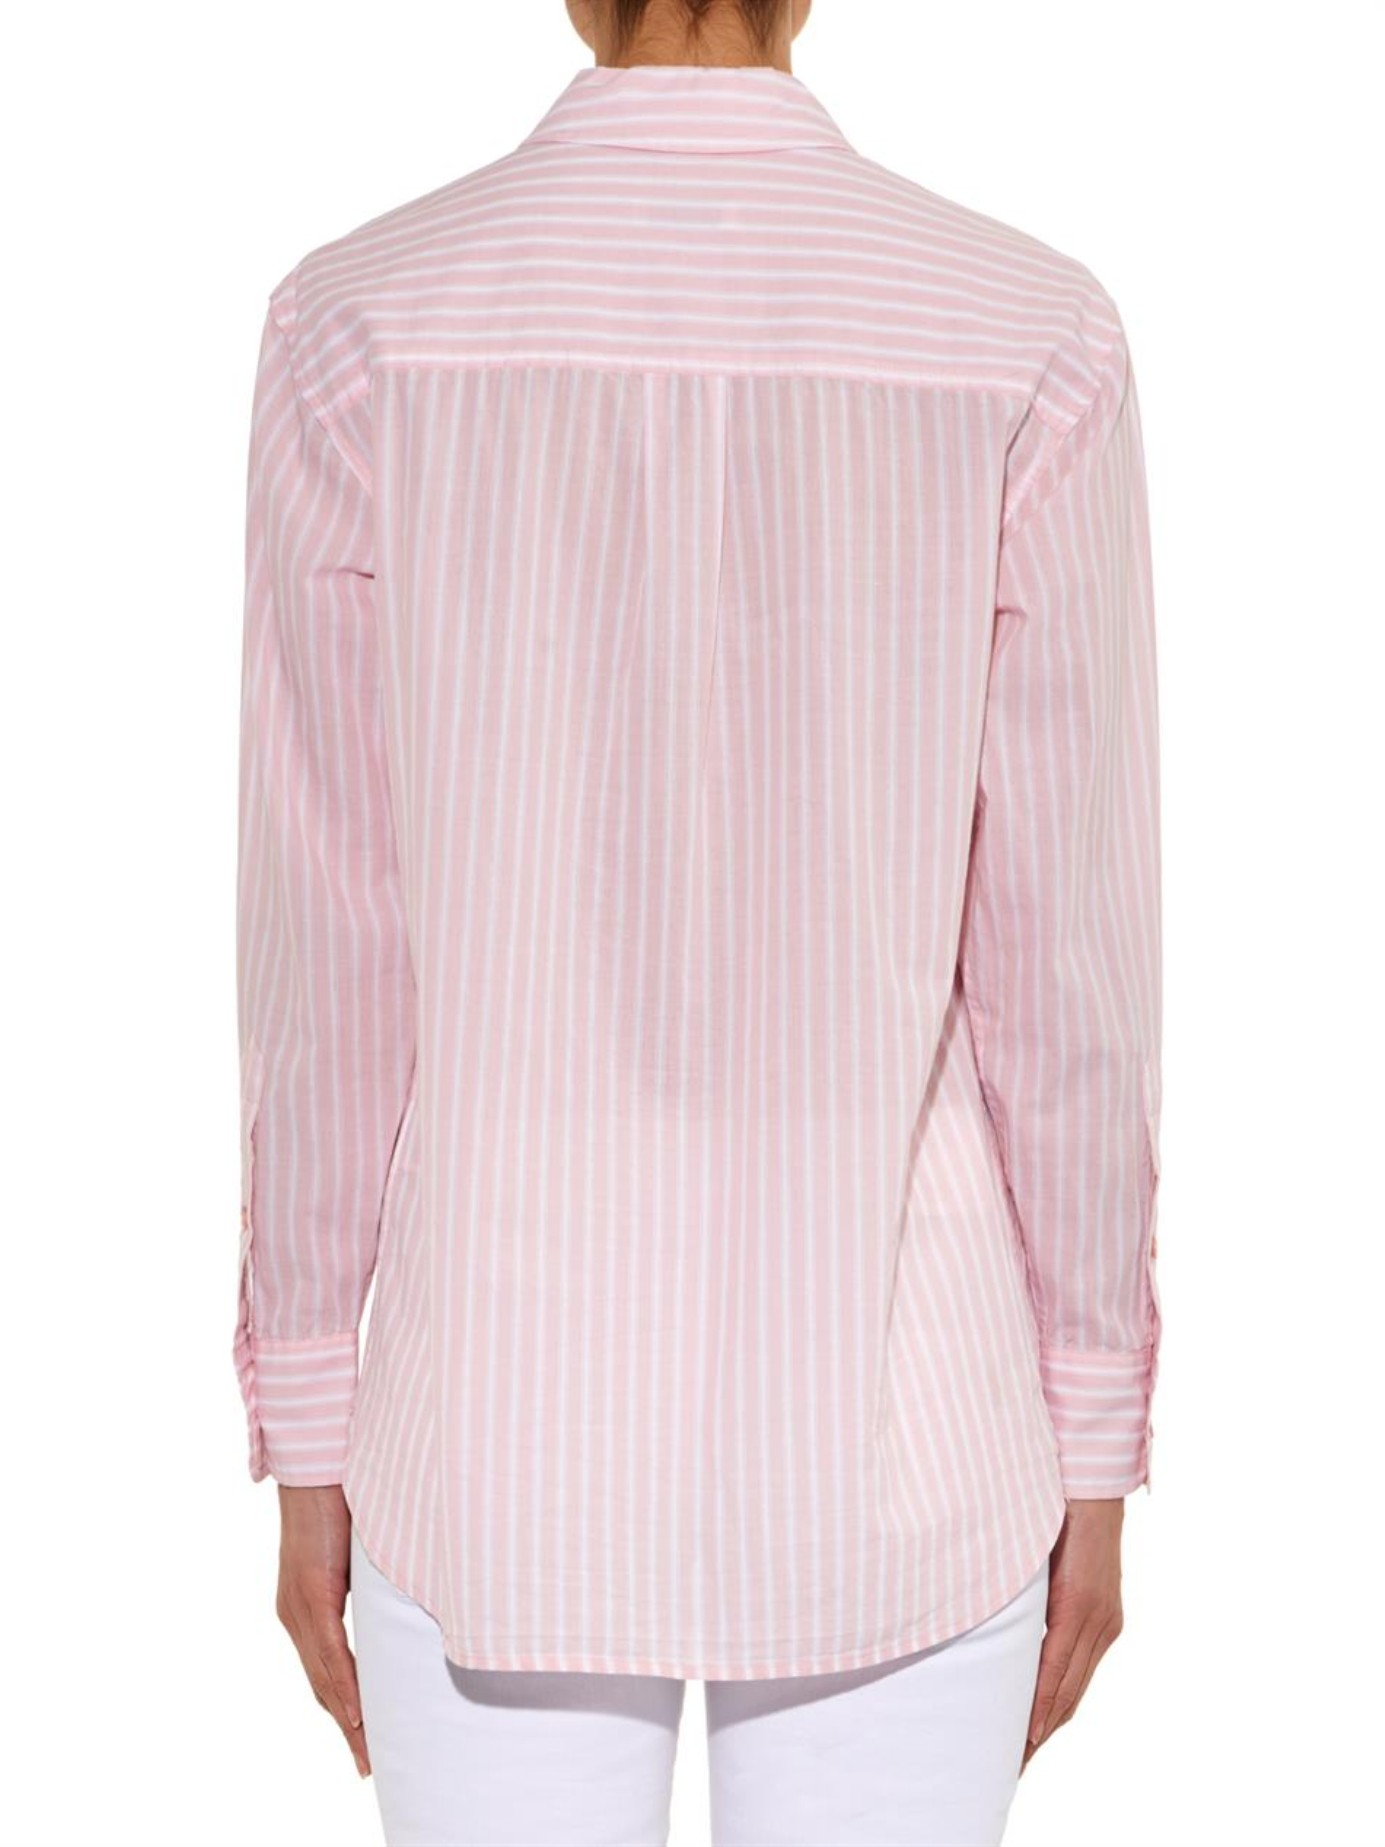 Equipment Striped Cotton Shirt in Pink White (Pink) - Lyst